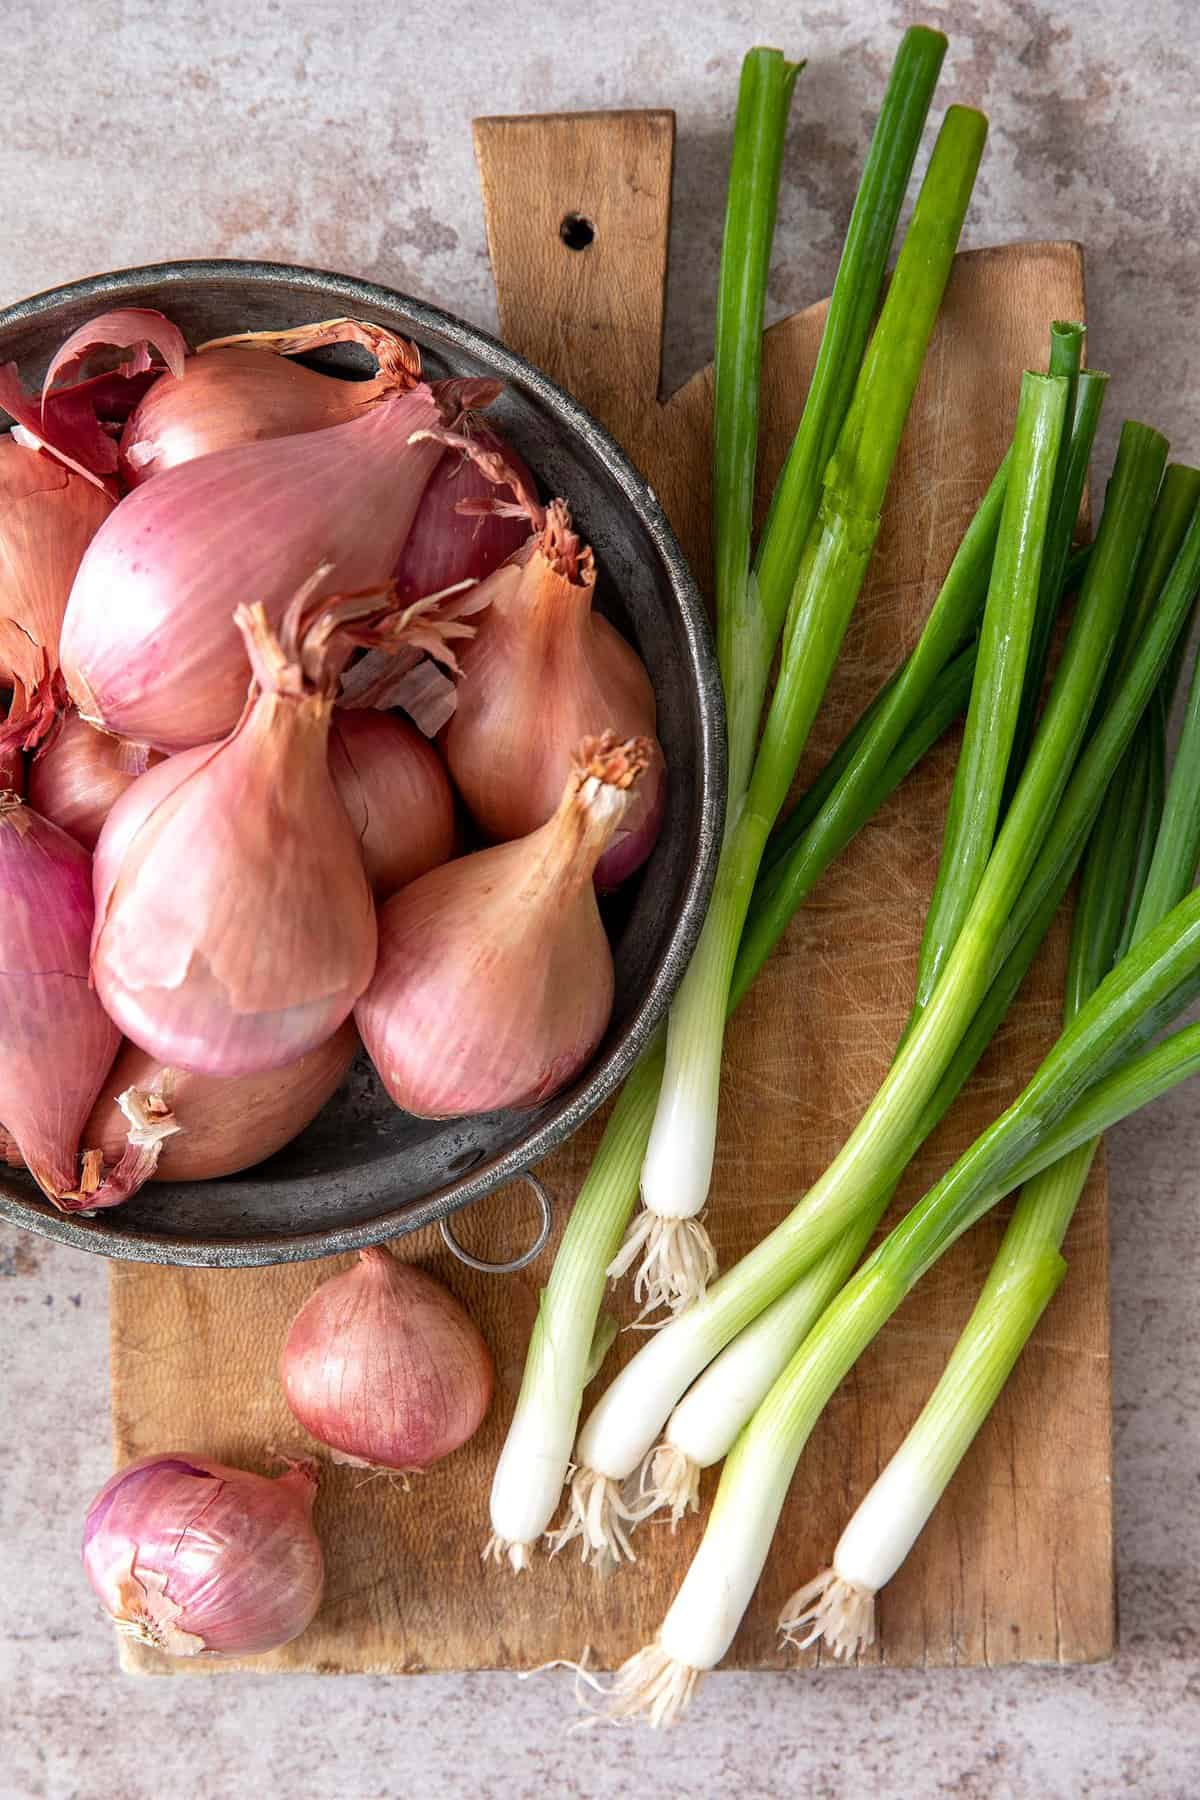 Best FAQ: What Are Shallots?